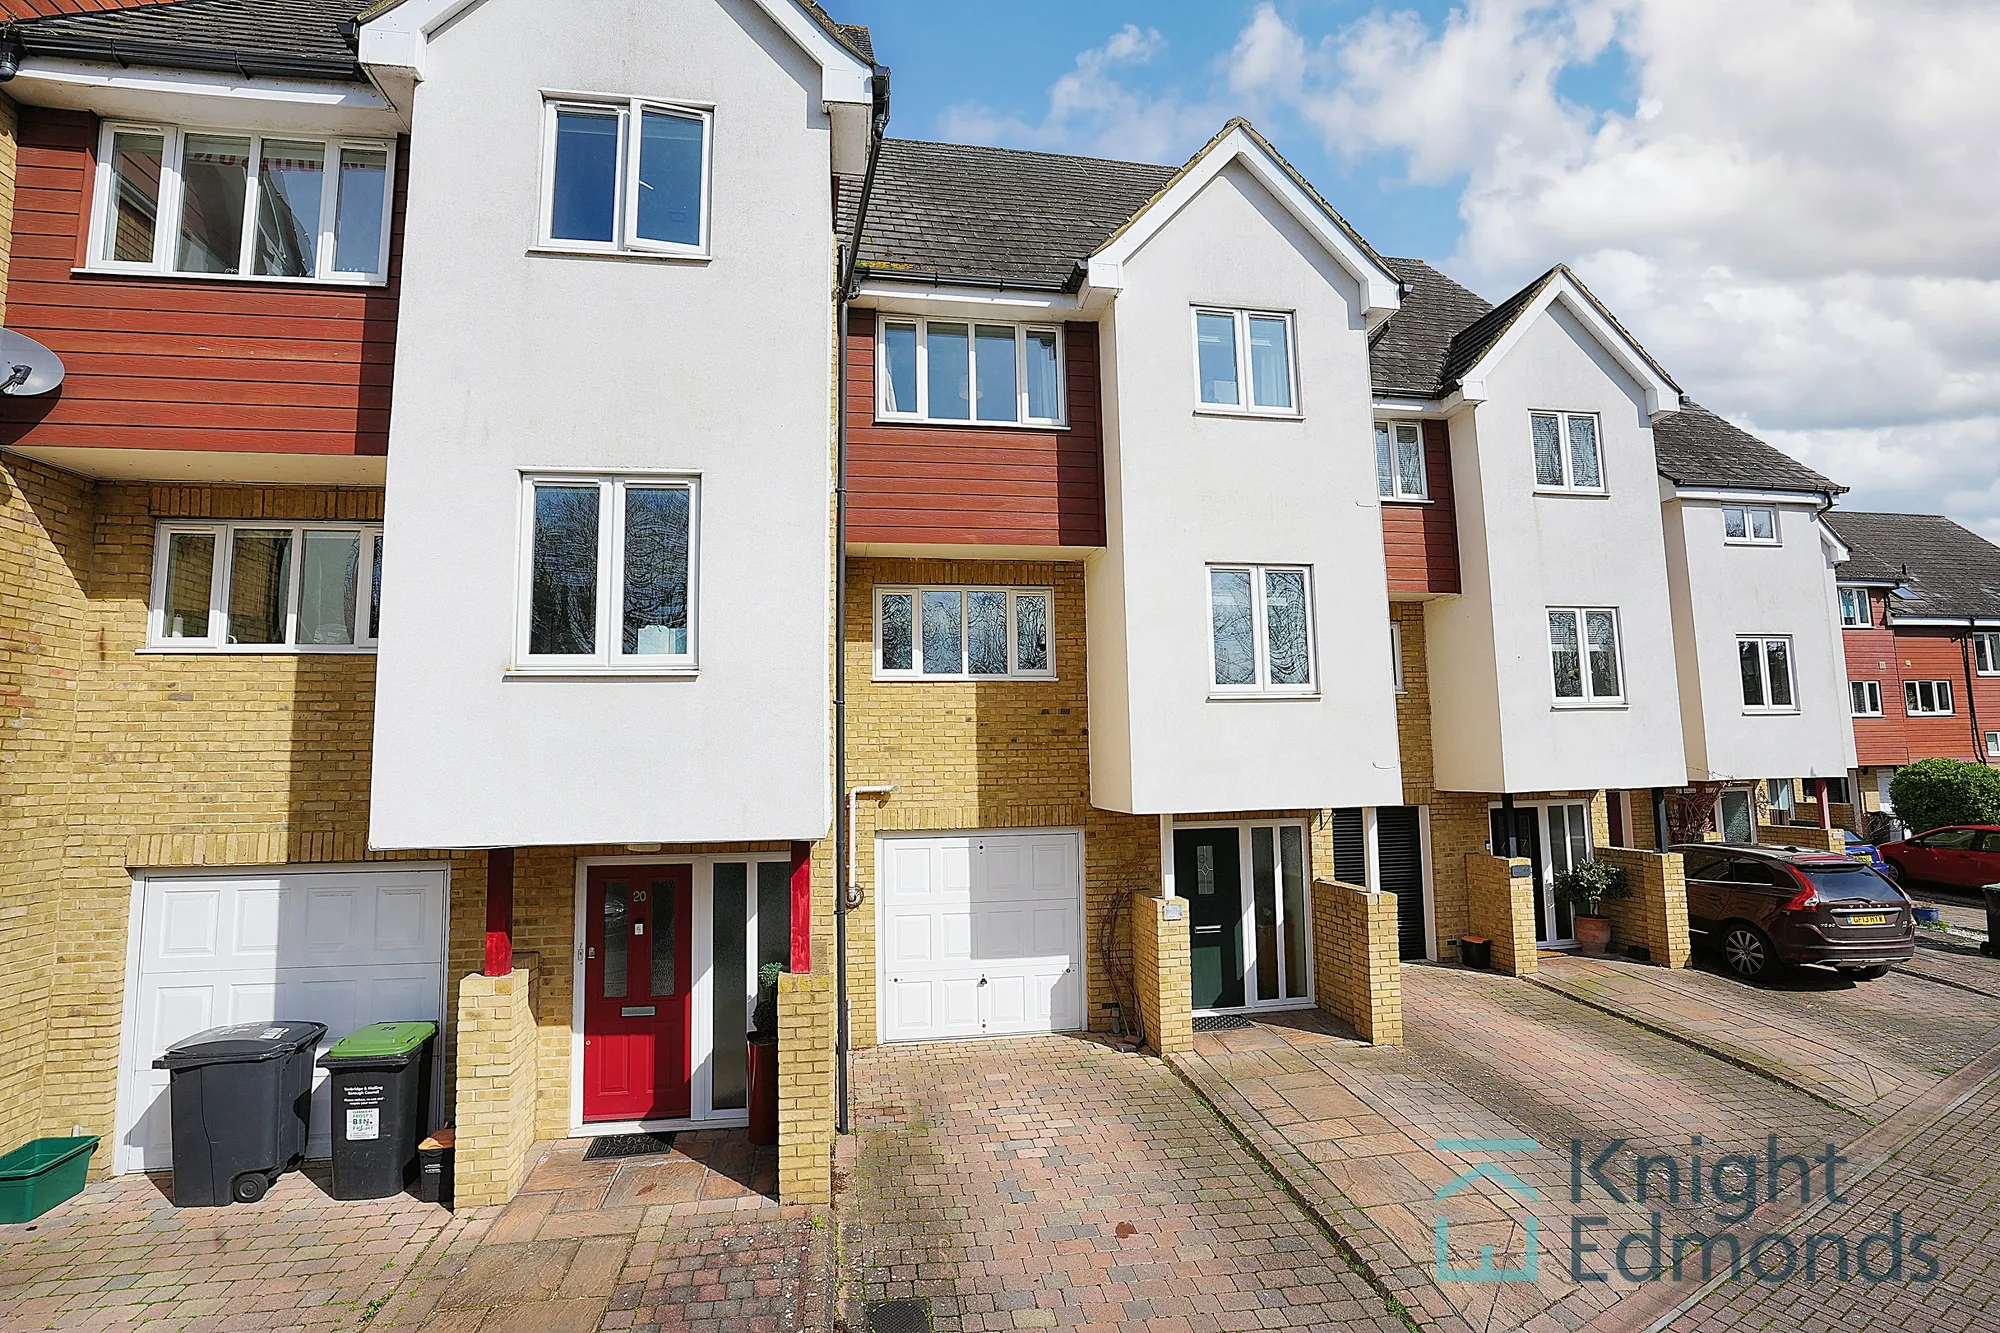 4 bed mid-terraced house for sale in Friars View, Aylesford  - Property Image 2